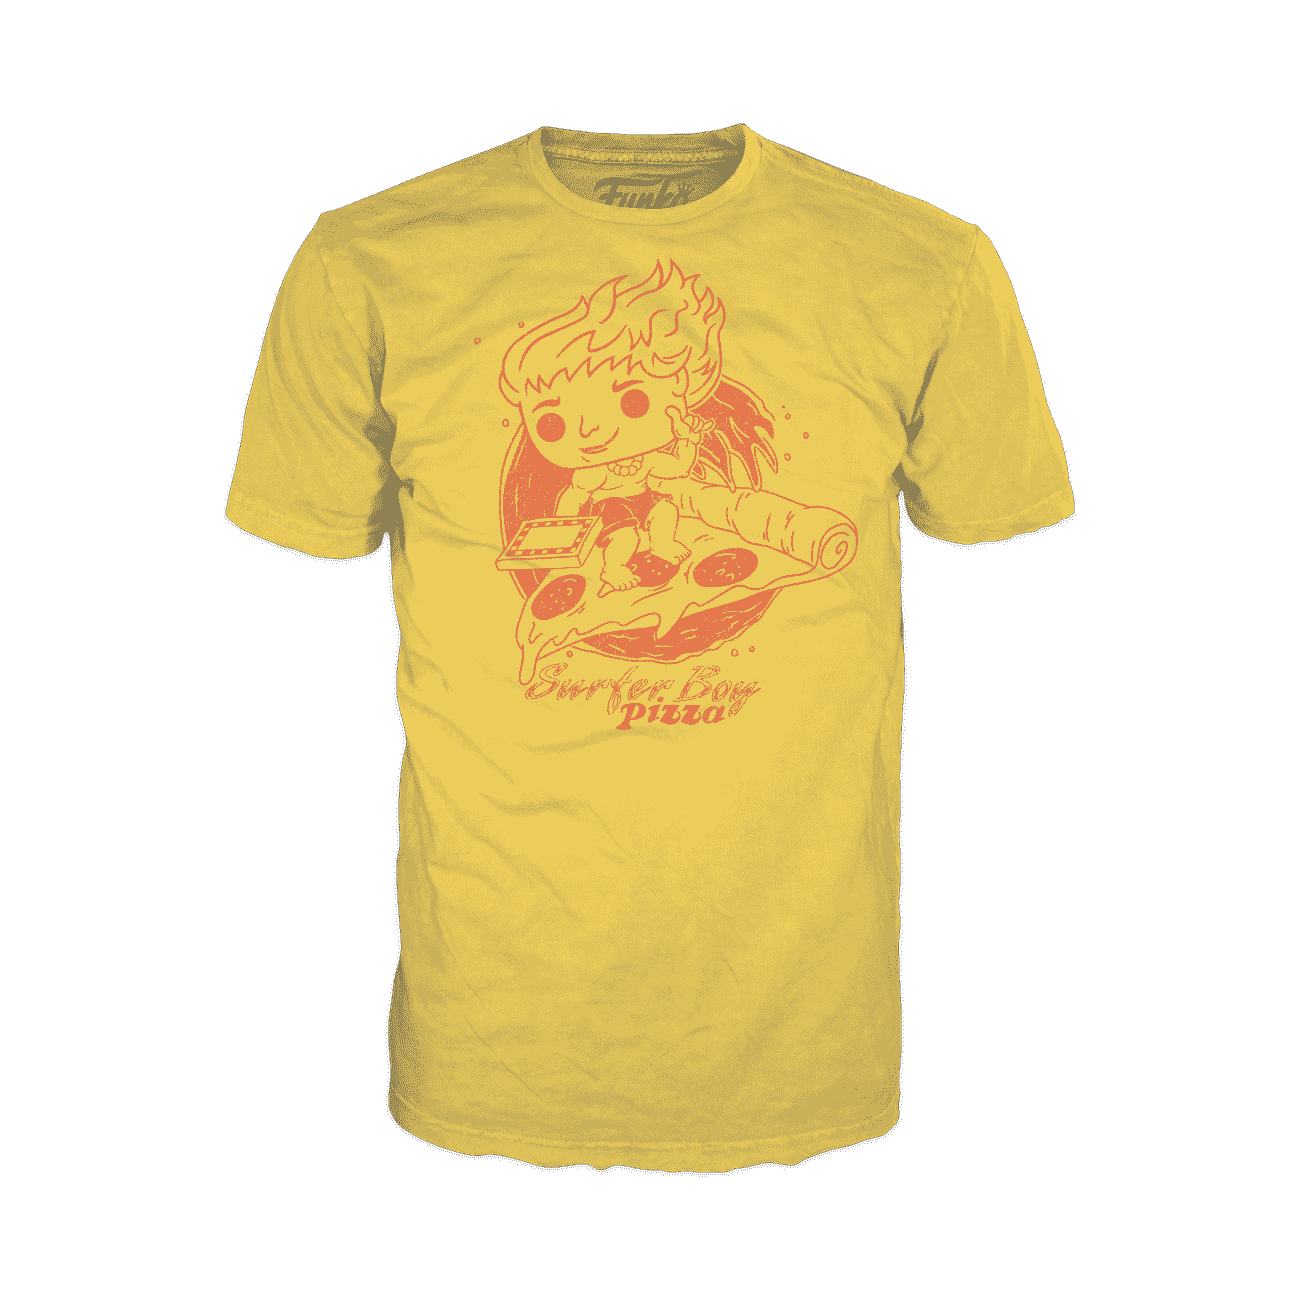 Buy Surfer Boy Pizza Tee at Funko.